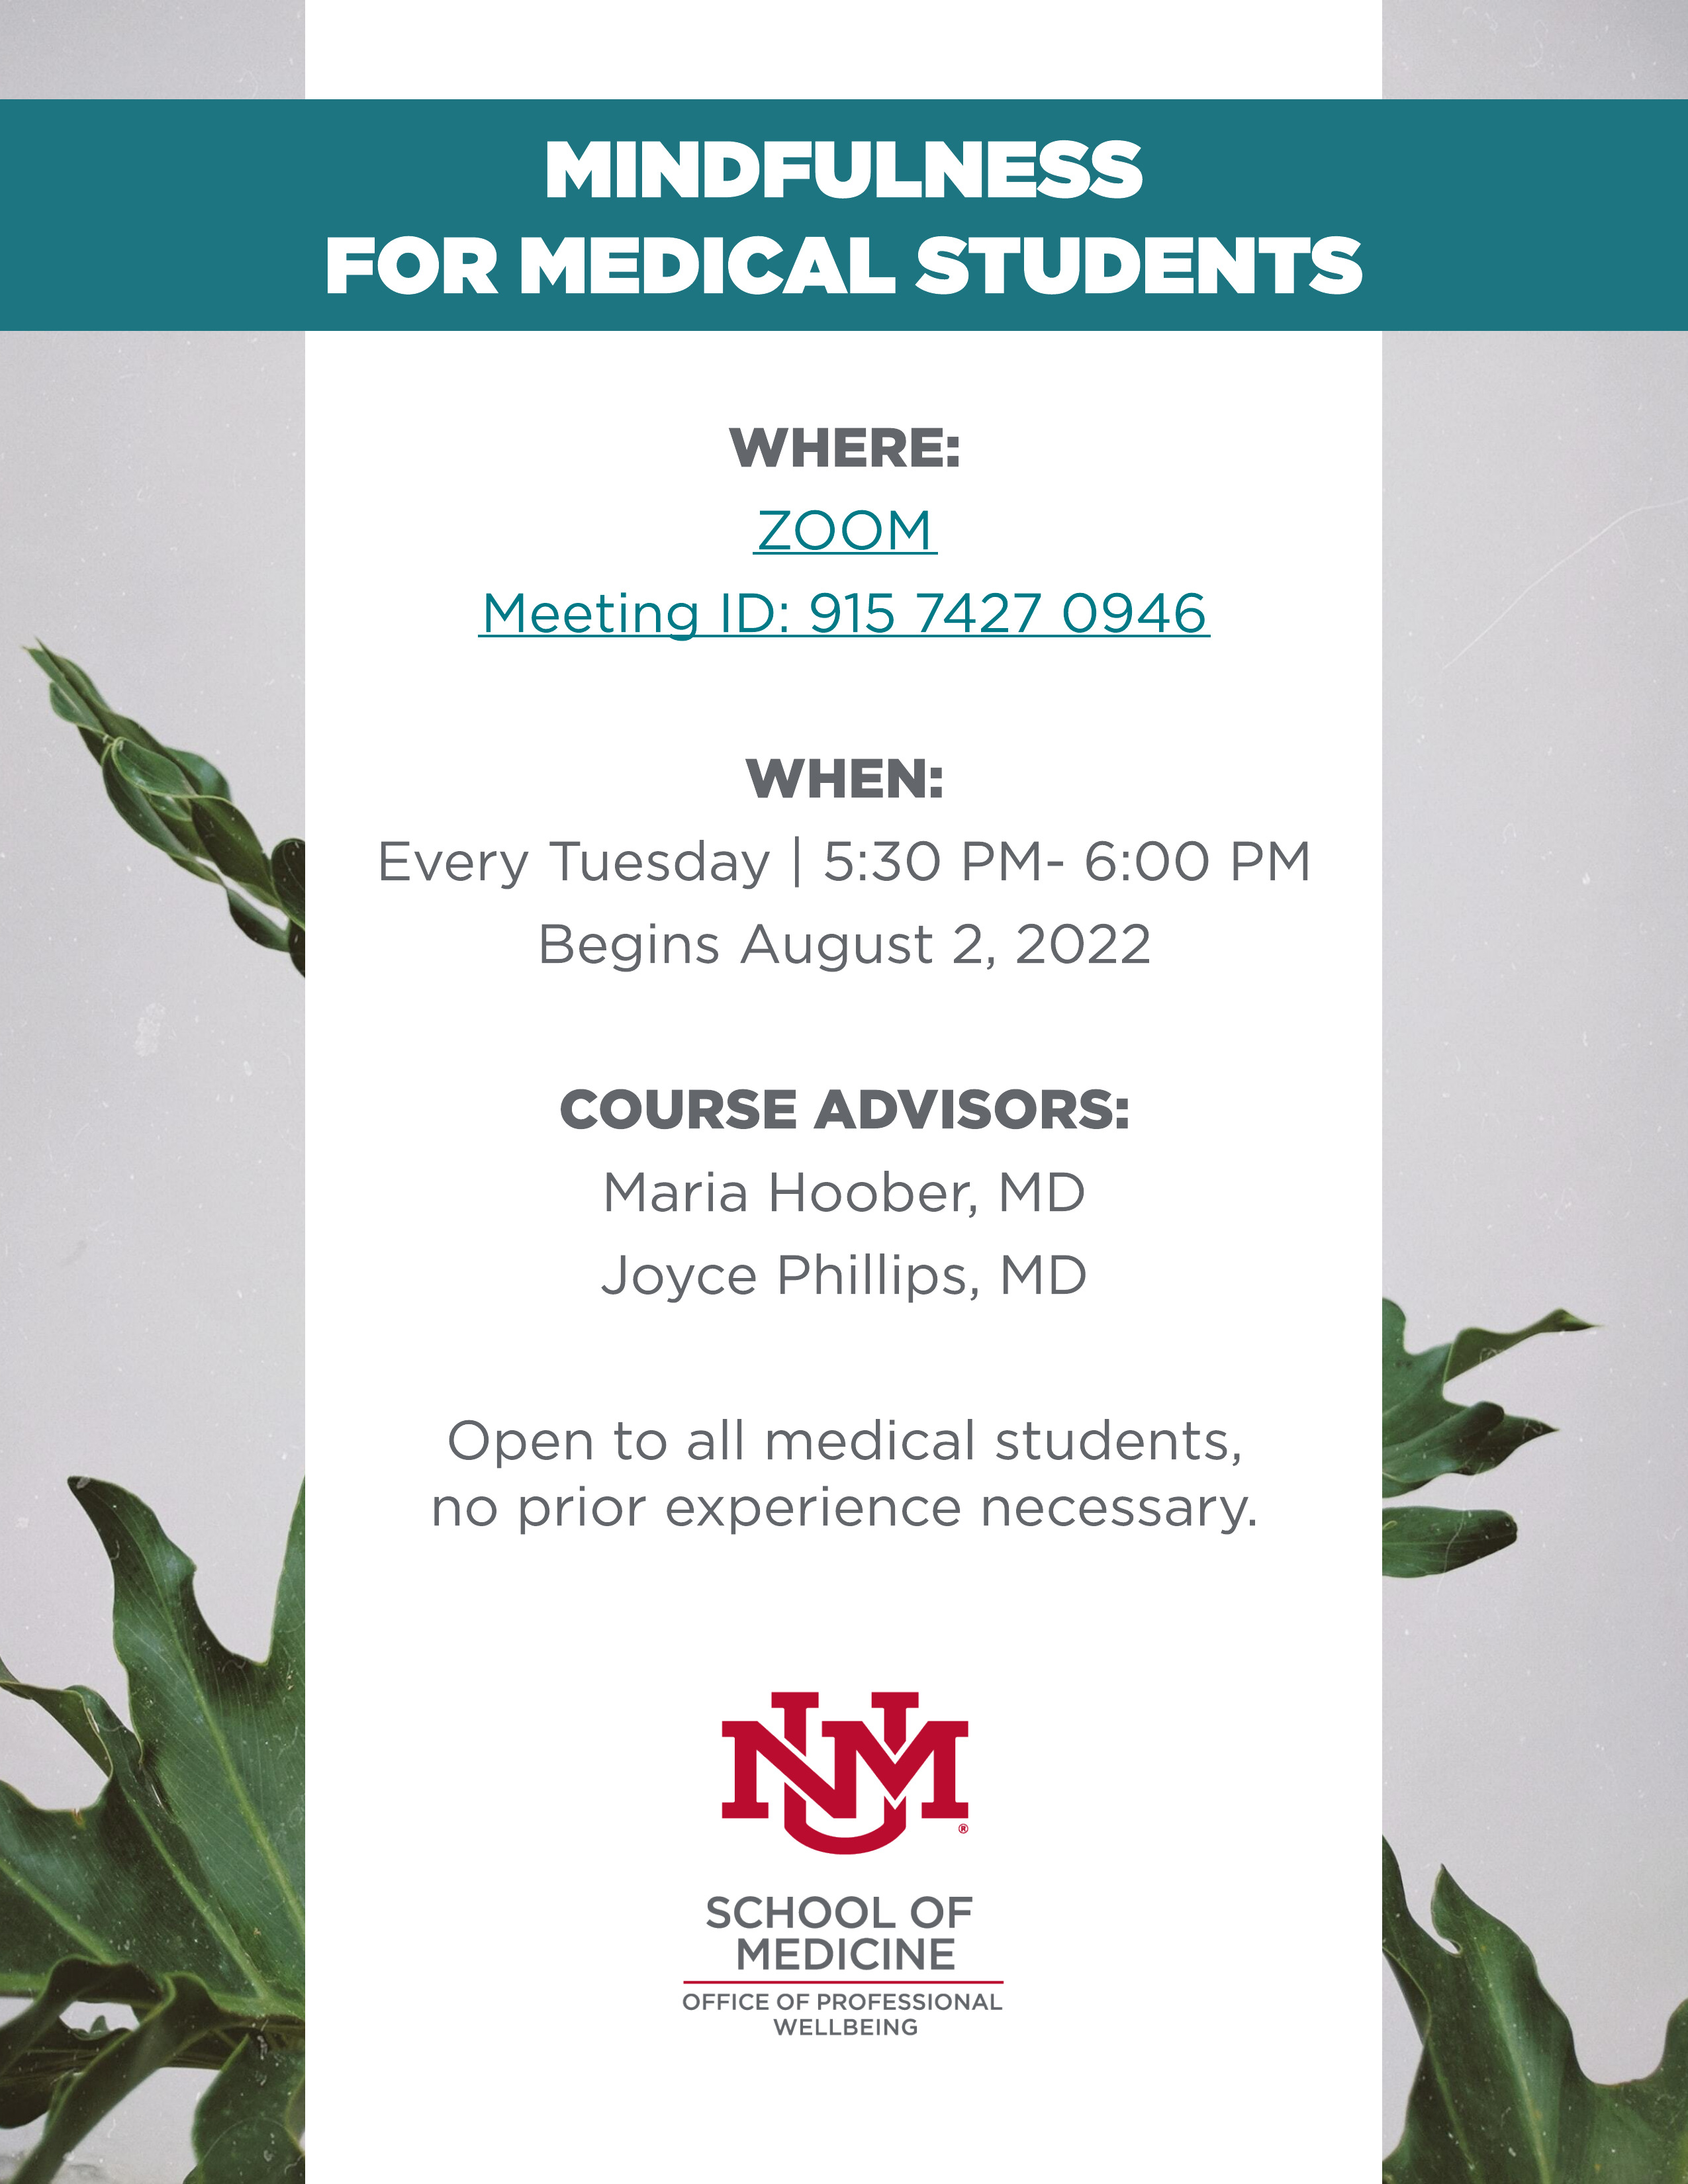 Mindfulness for Medical Students - Tuesdays from 5:30 PM to 6:00 PM on Zoom